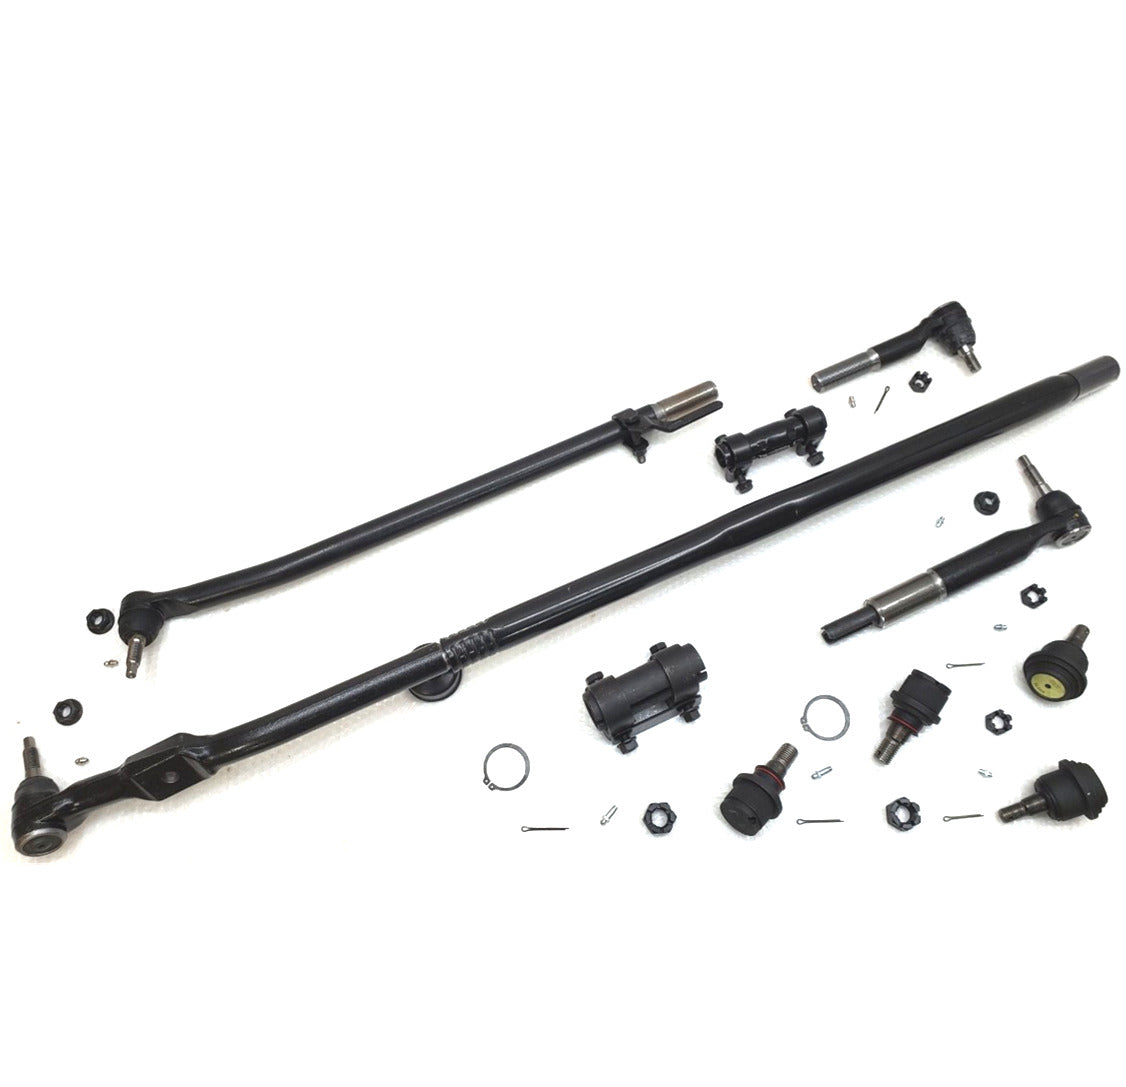 XRF Dodge Ram 2500 3500 4x4 2009 - 2012 Steering and Suspension New T Design Kit